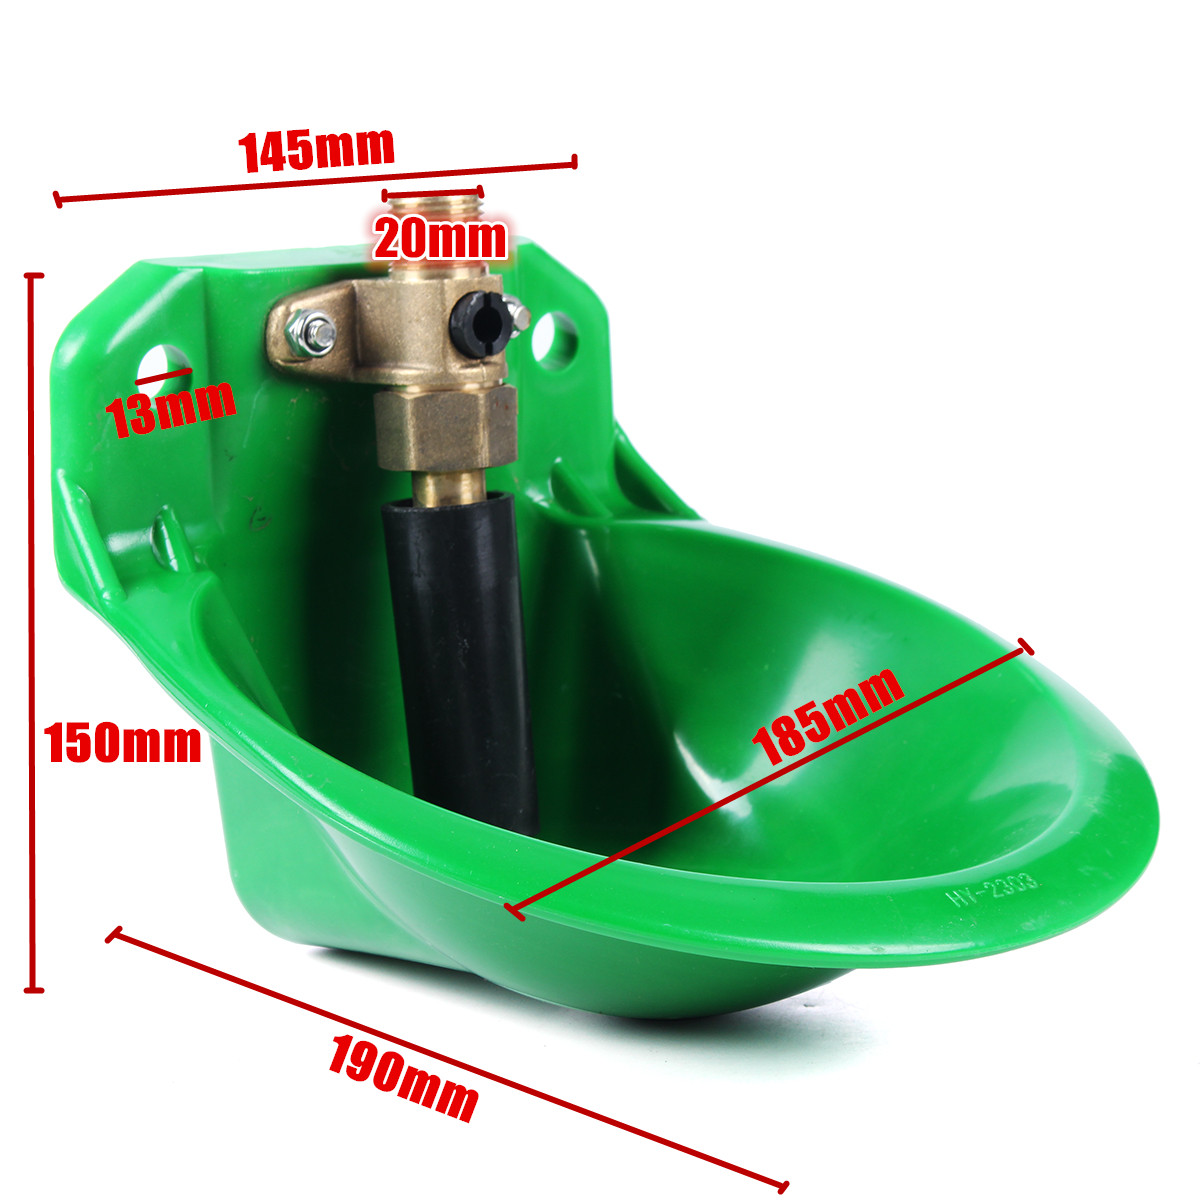 Water-Bowl-Float-Valve-Drinking-Stock-Waterer-Copper-Horse-Sheep-Automatic-Pet-Bowl-1290252